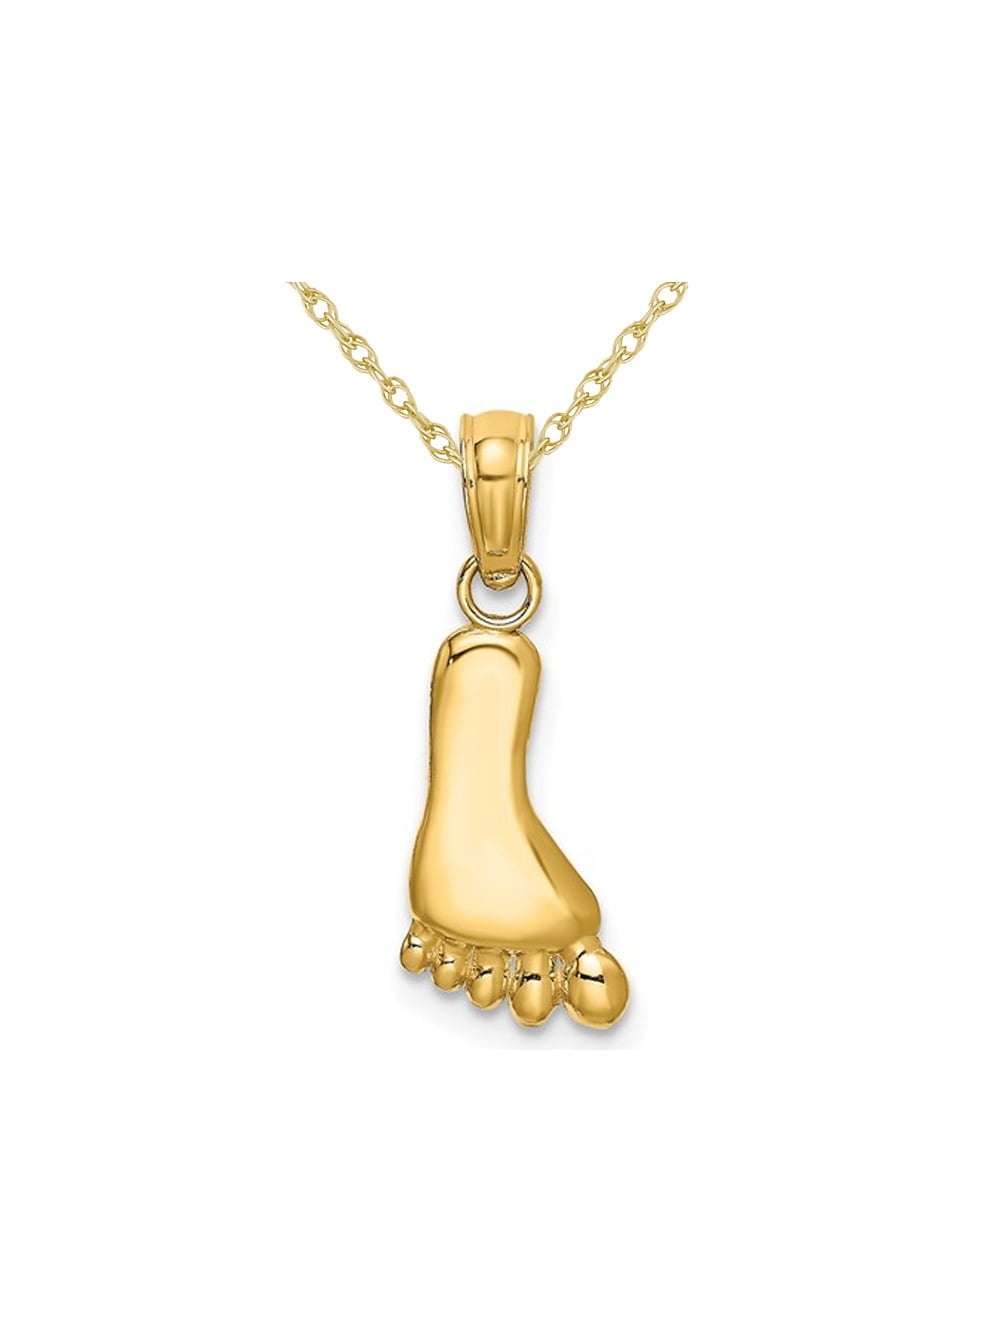 14K Yellow Gold Soccer Jersey Charm Pendant For Necklace or Chain 